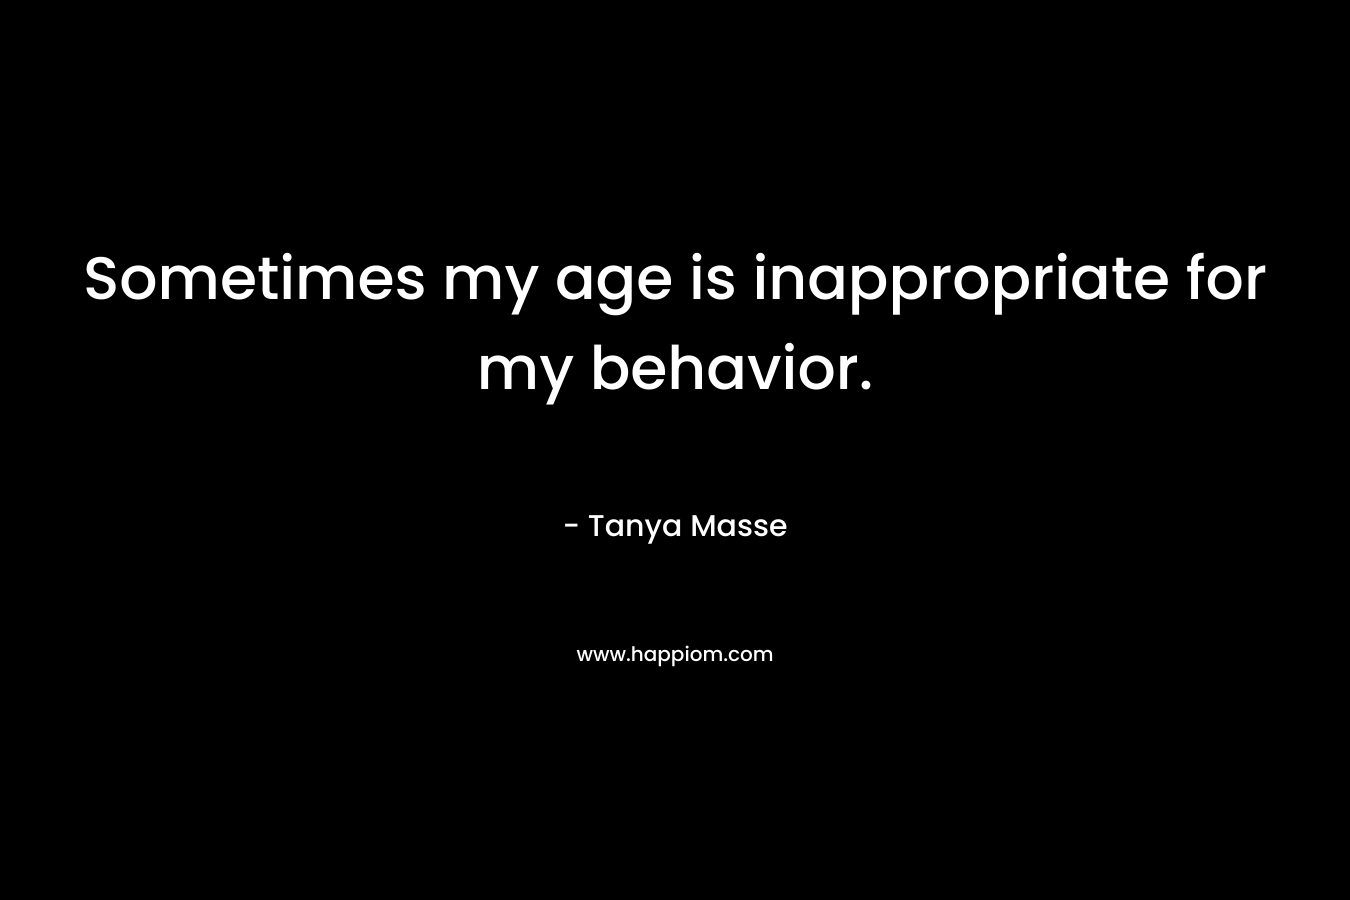 Sometimes my age is inappropriate for my behavior. – Tanya Masse